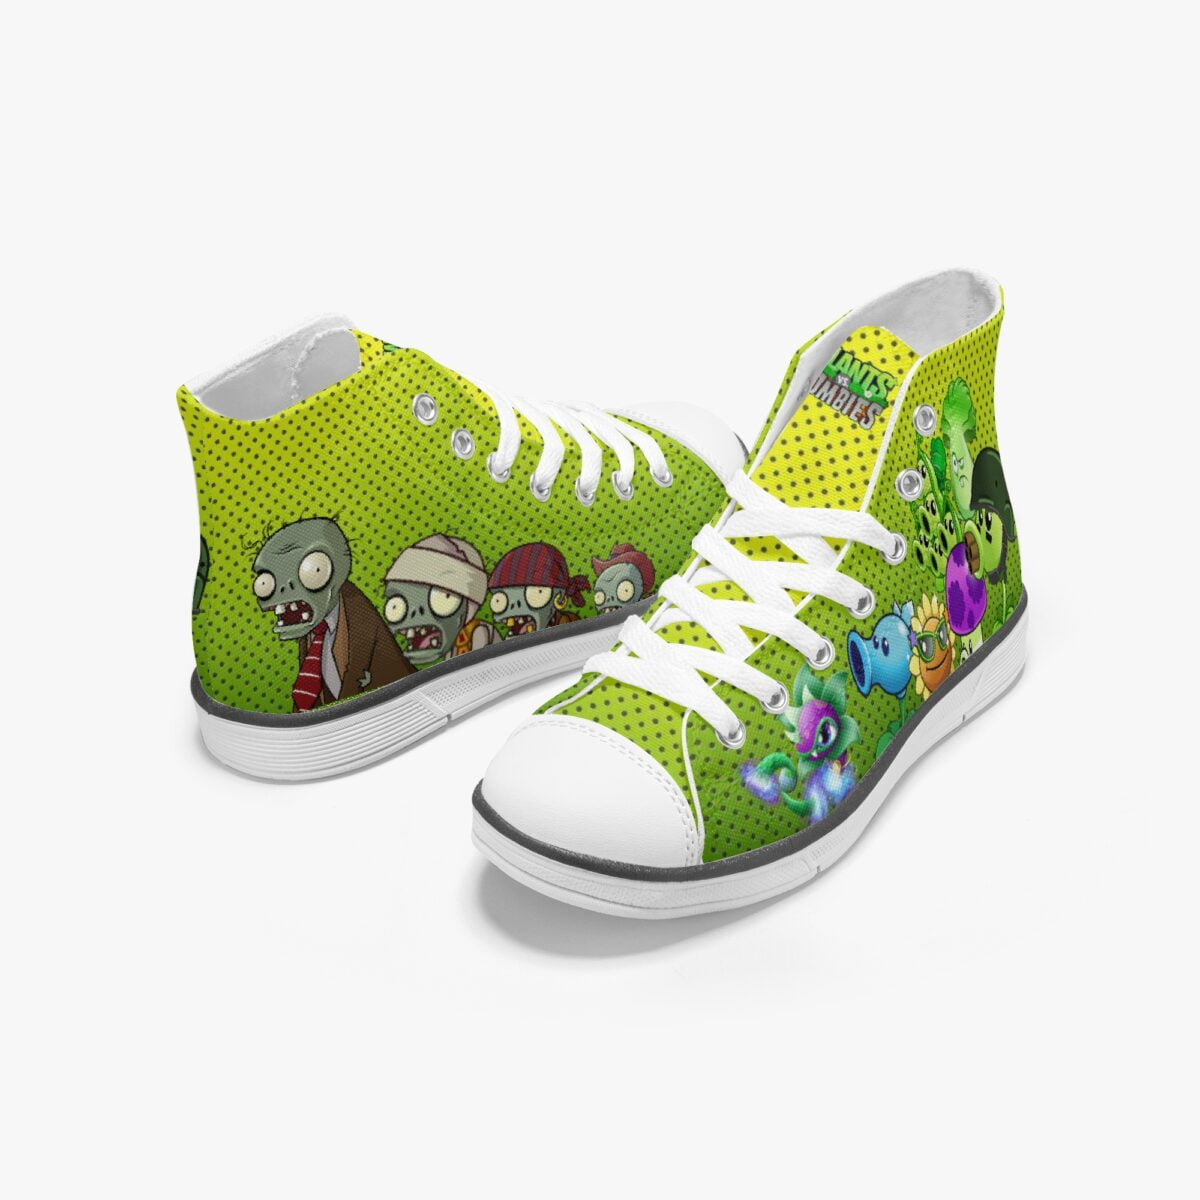 Plants vs Zombies Personalized High-Top Sneakers for Children Cool Kiddo 16